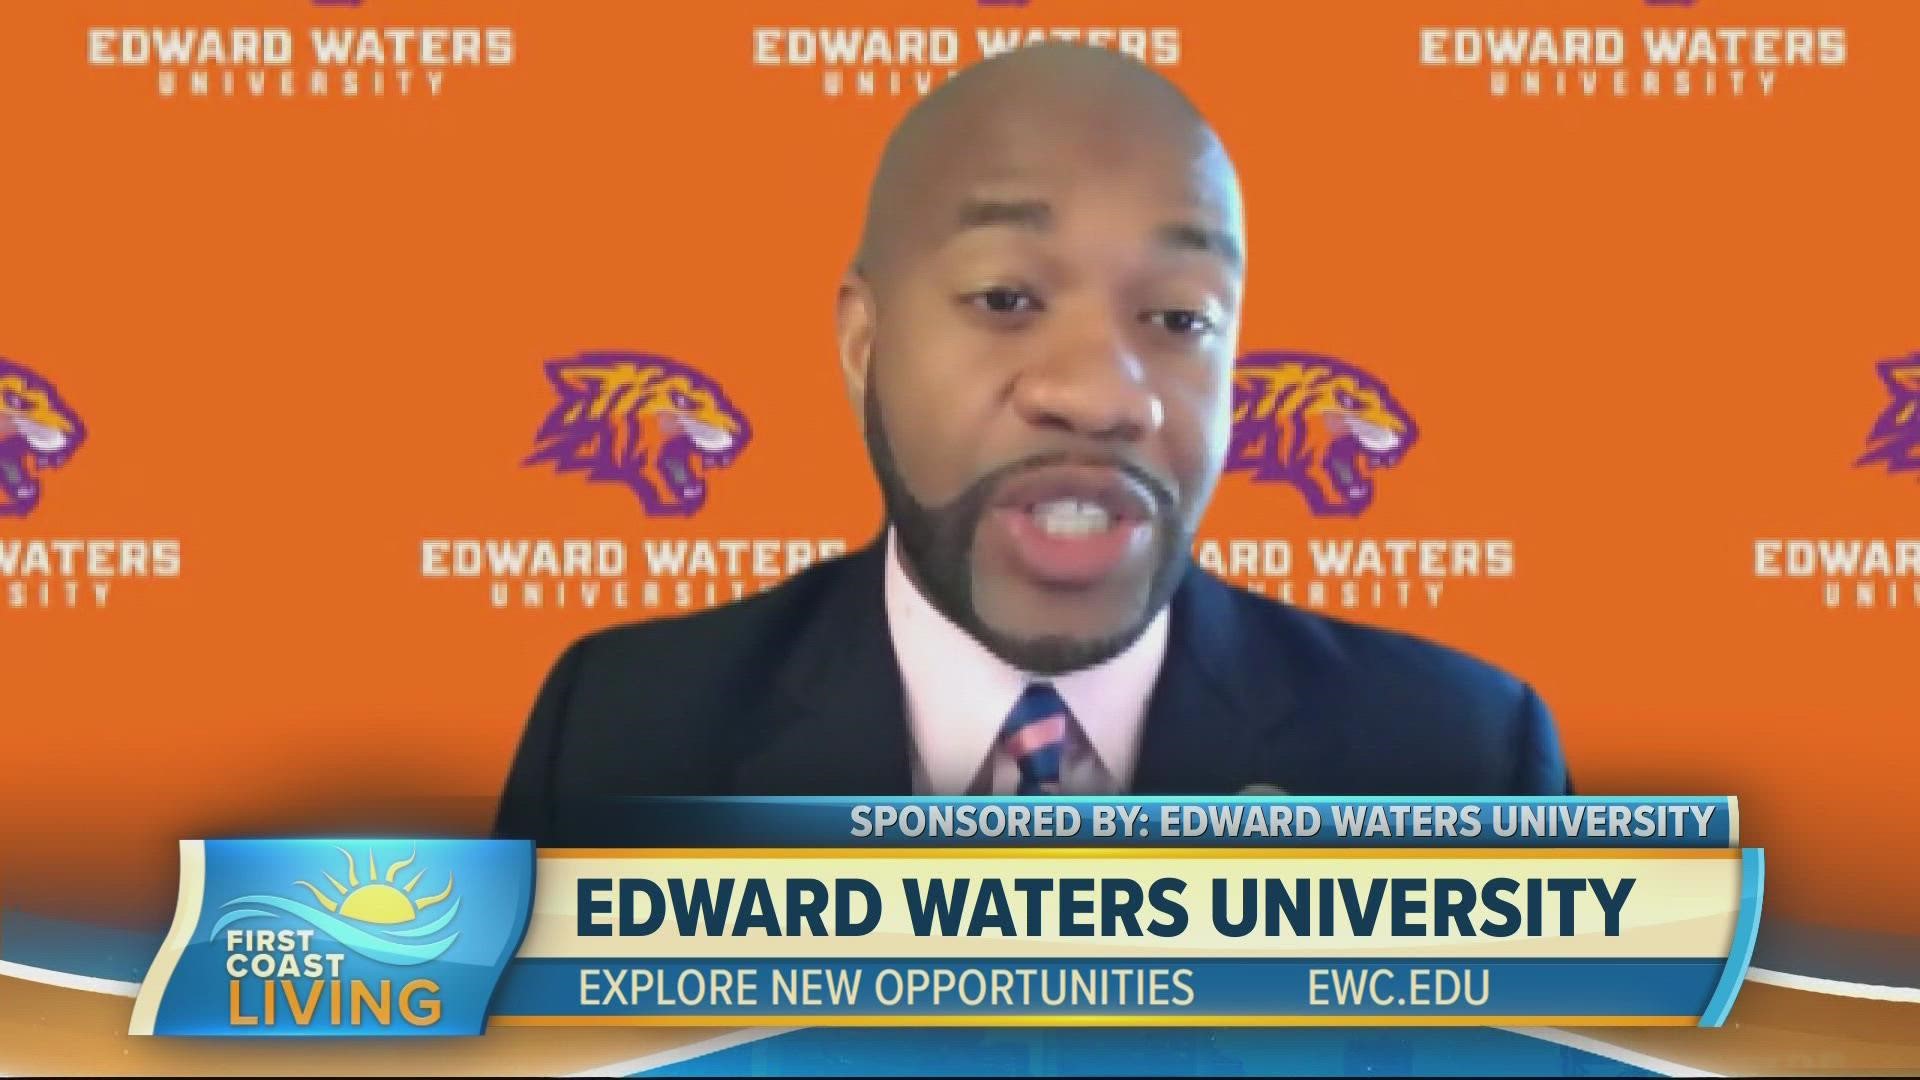 Edward Waters is proud of its historic past and is undergoing a transformation paving the way for a bright future.